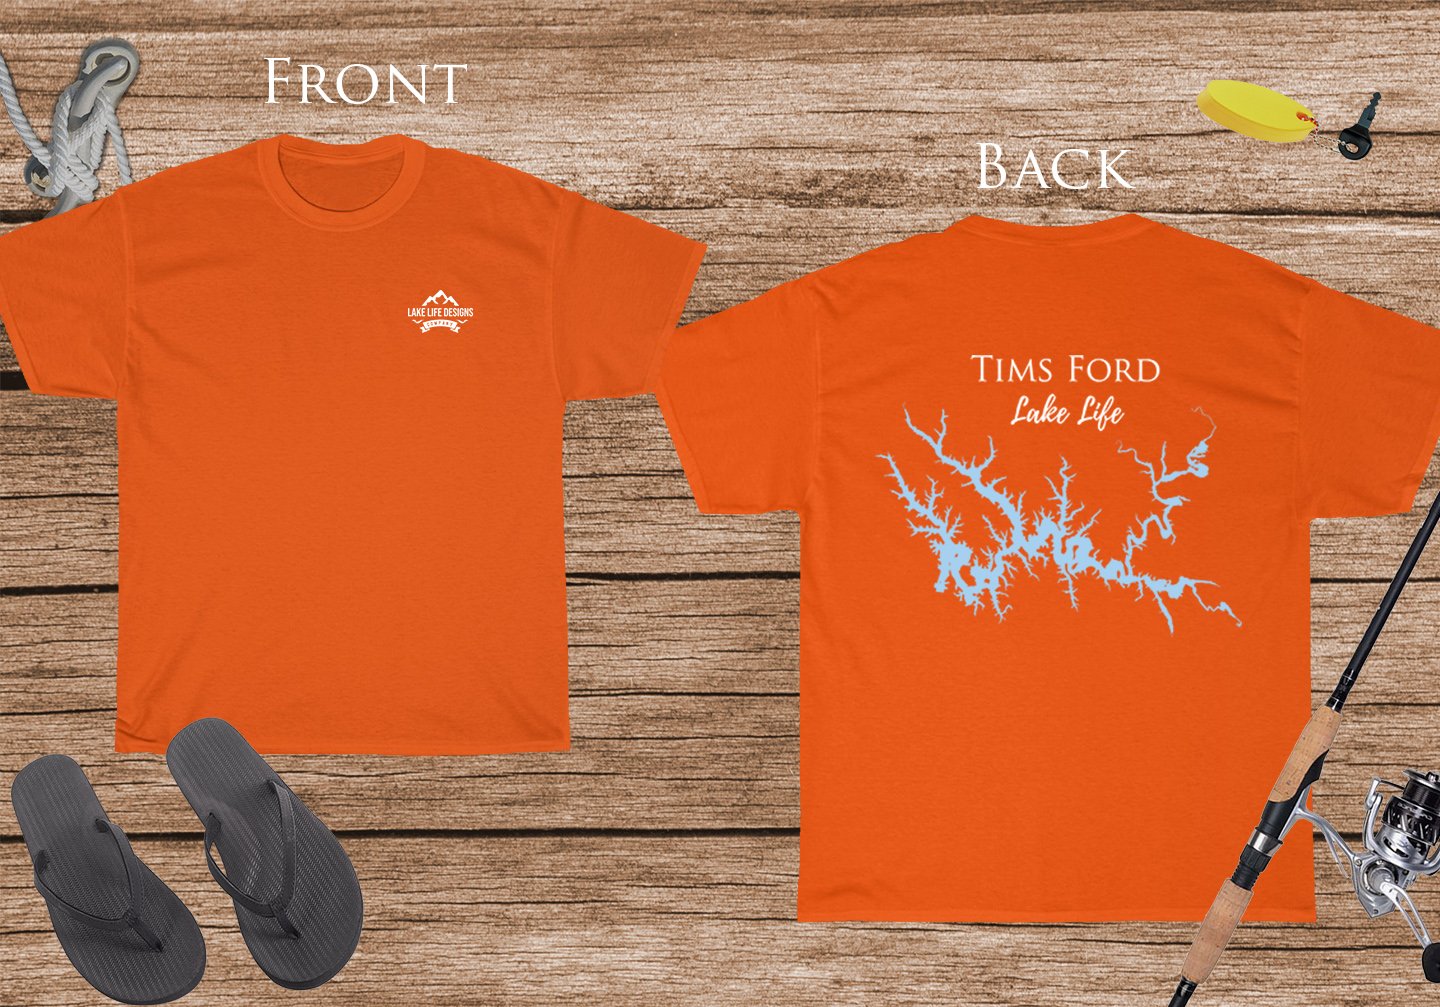 Tims Ford Lake Life - Cotton Short Sleeved - FRONT & BACK PRINTED - Short Sleeved Cotton Tee - Tennessee Lake